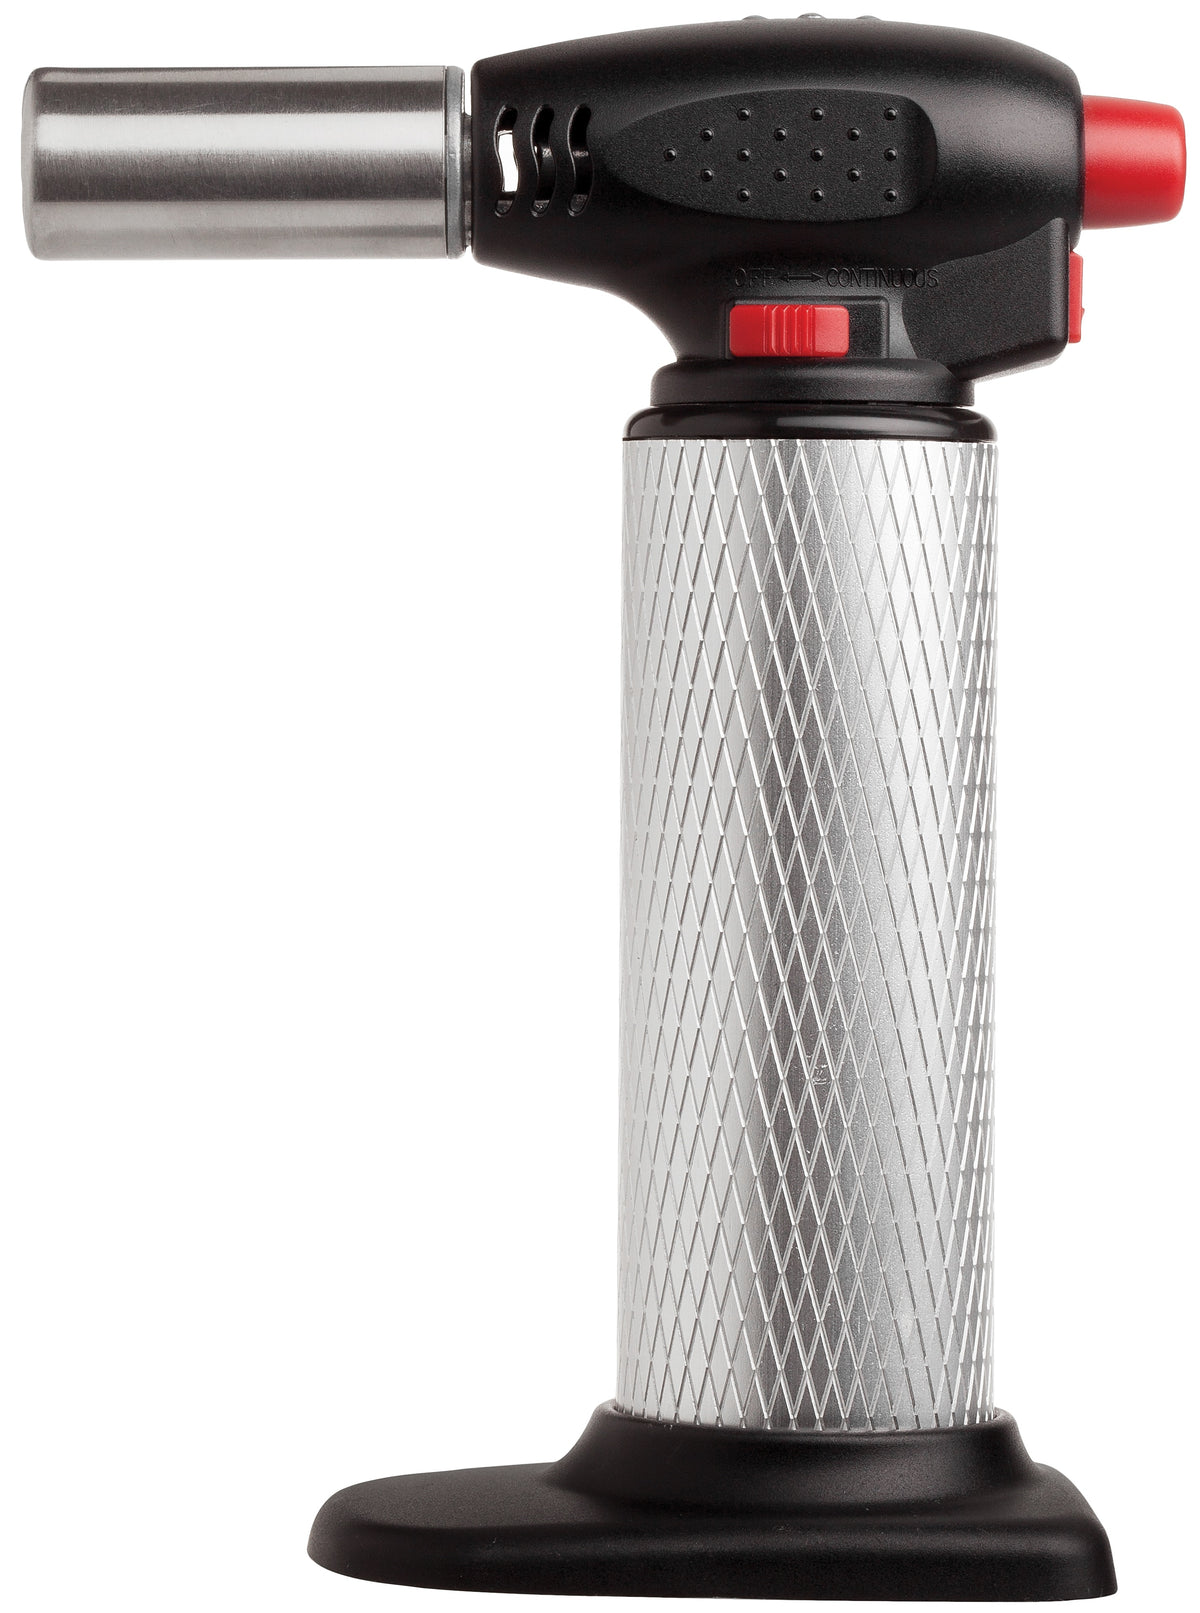 Mrs. Anderson's 43750 Baking Cooking Torch, Aluminum